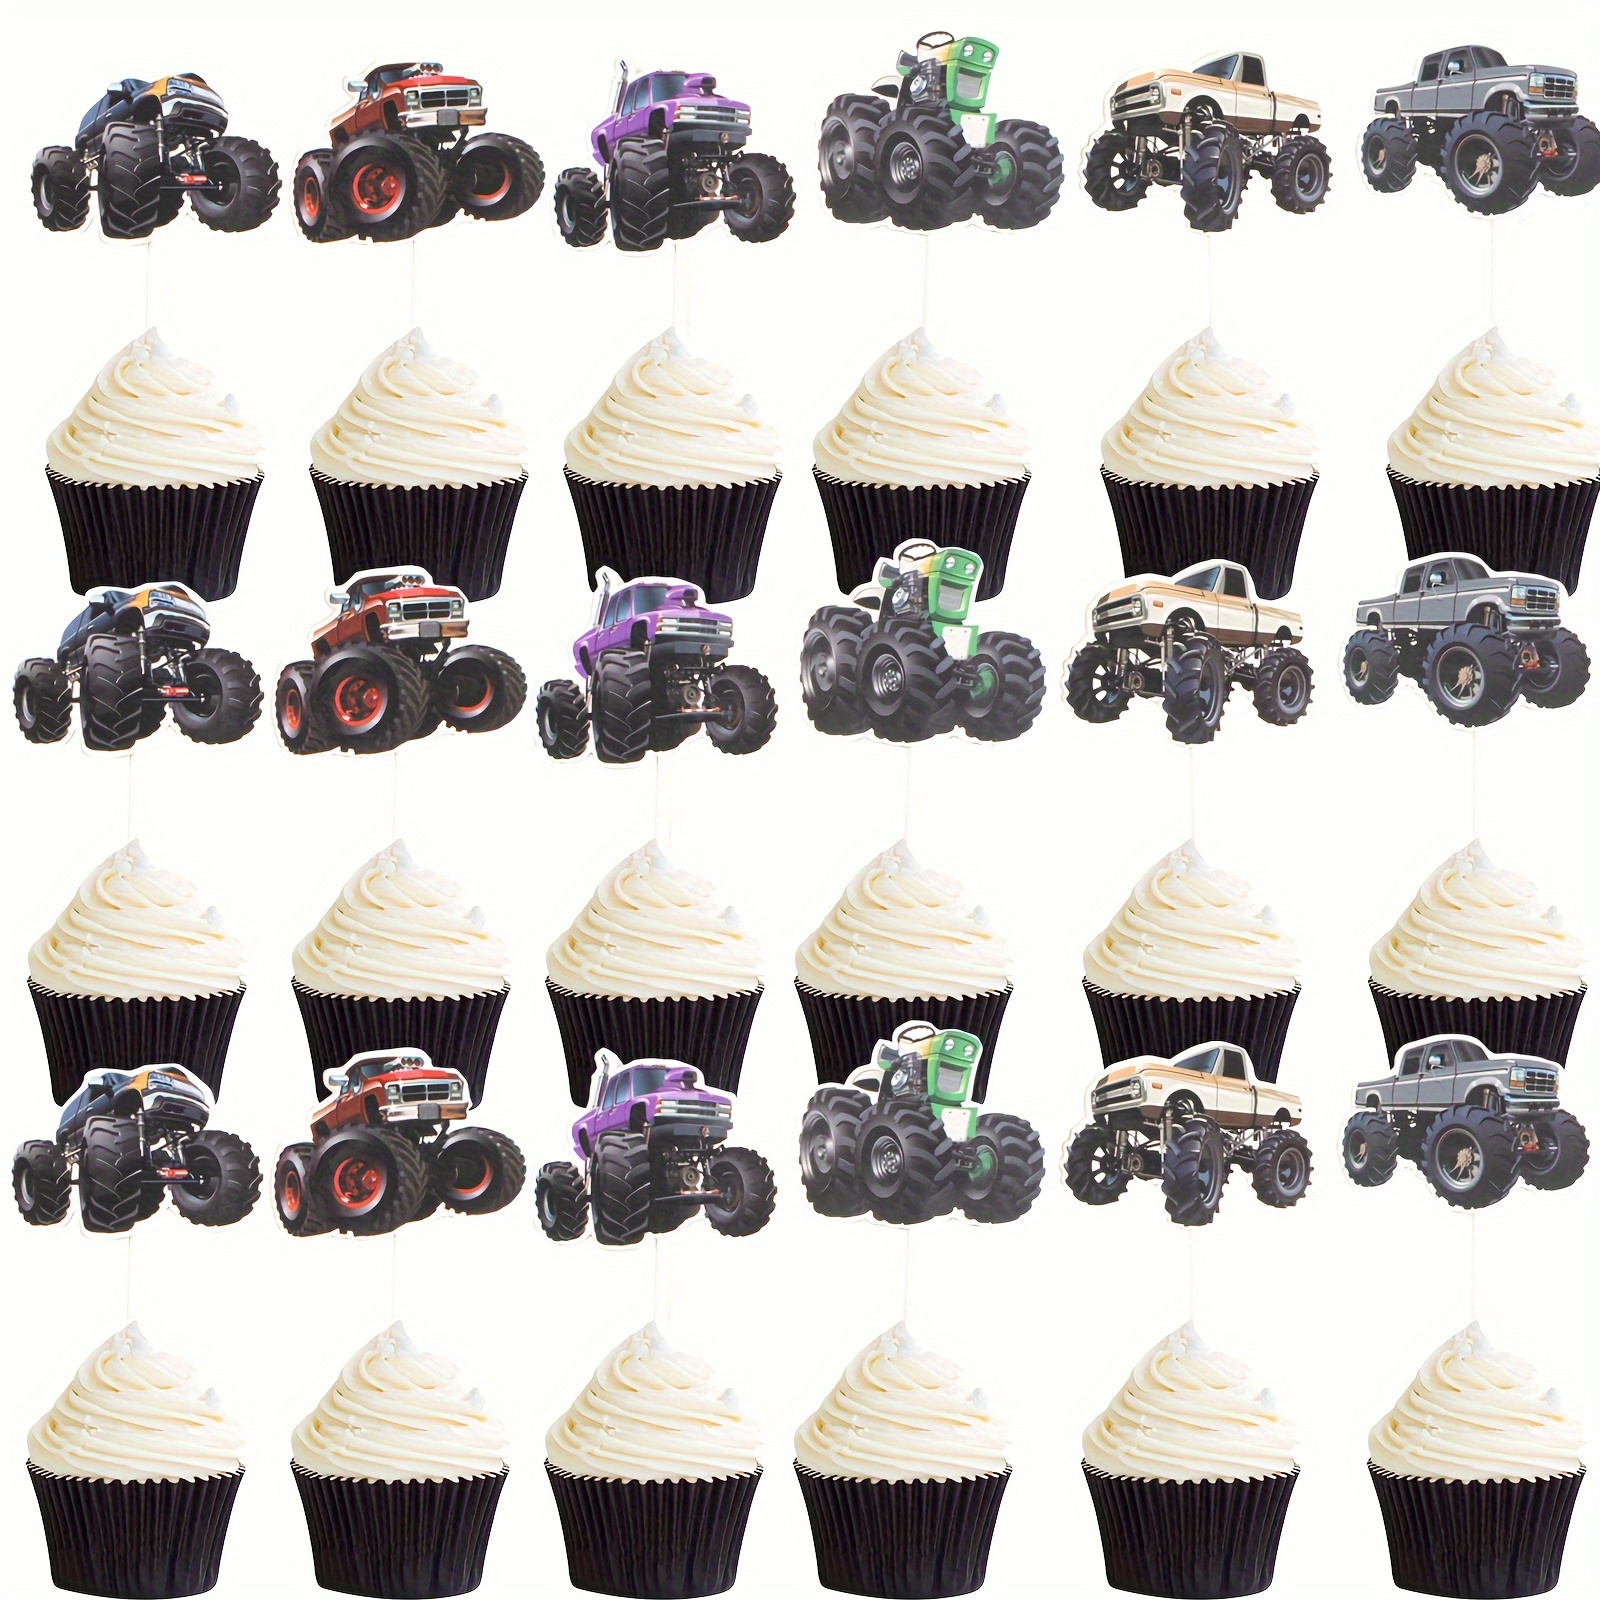 

Monster Truck Cake Toppers - 18 Pack Durable Car Cupcake Toppers For Birthday Party Decor, Vehicle Theme Cake Decorations, Fun Party Supplies For Kids & Adults - Applicable Age Group 14+